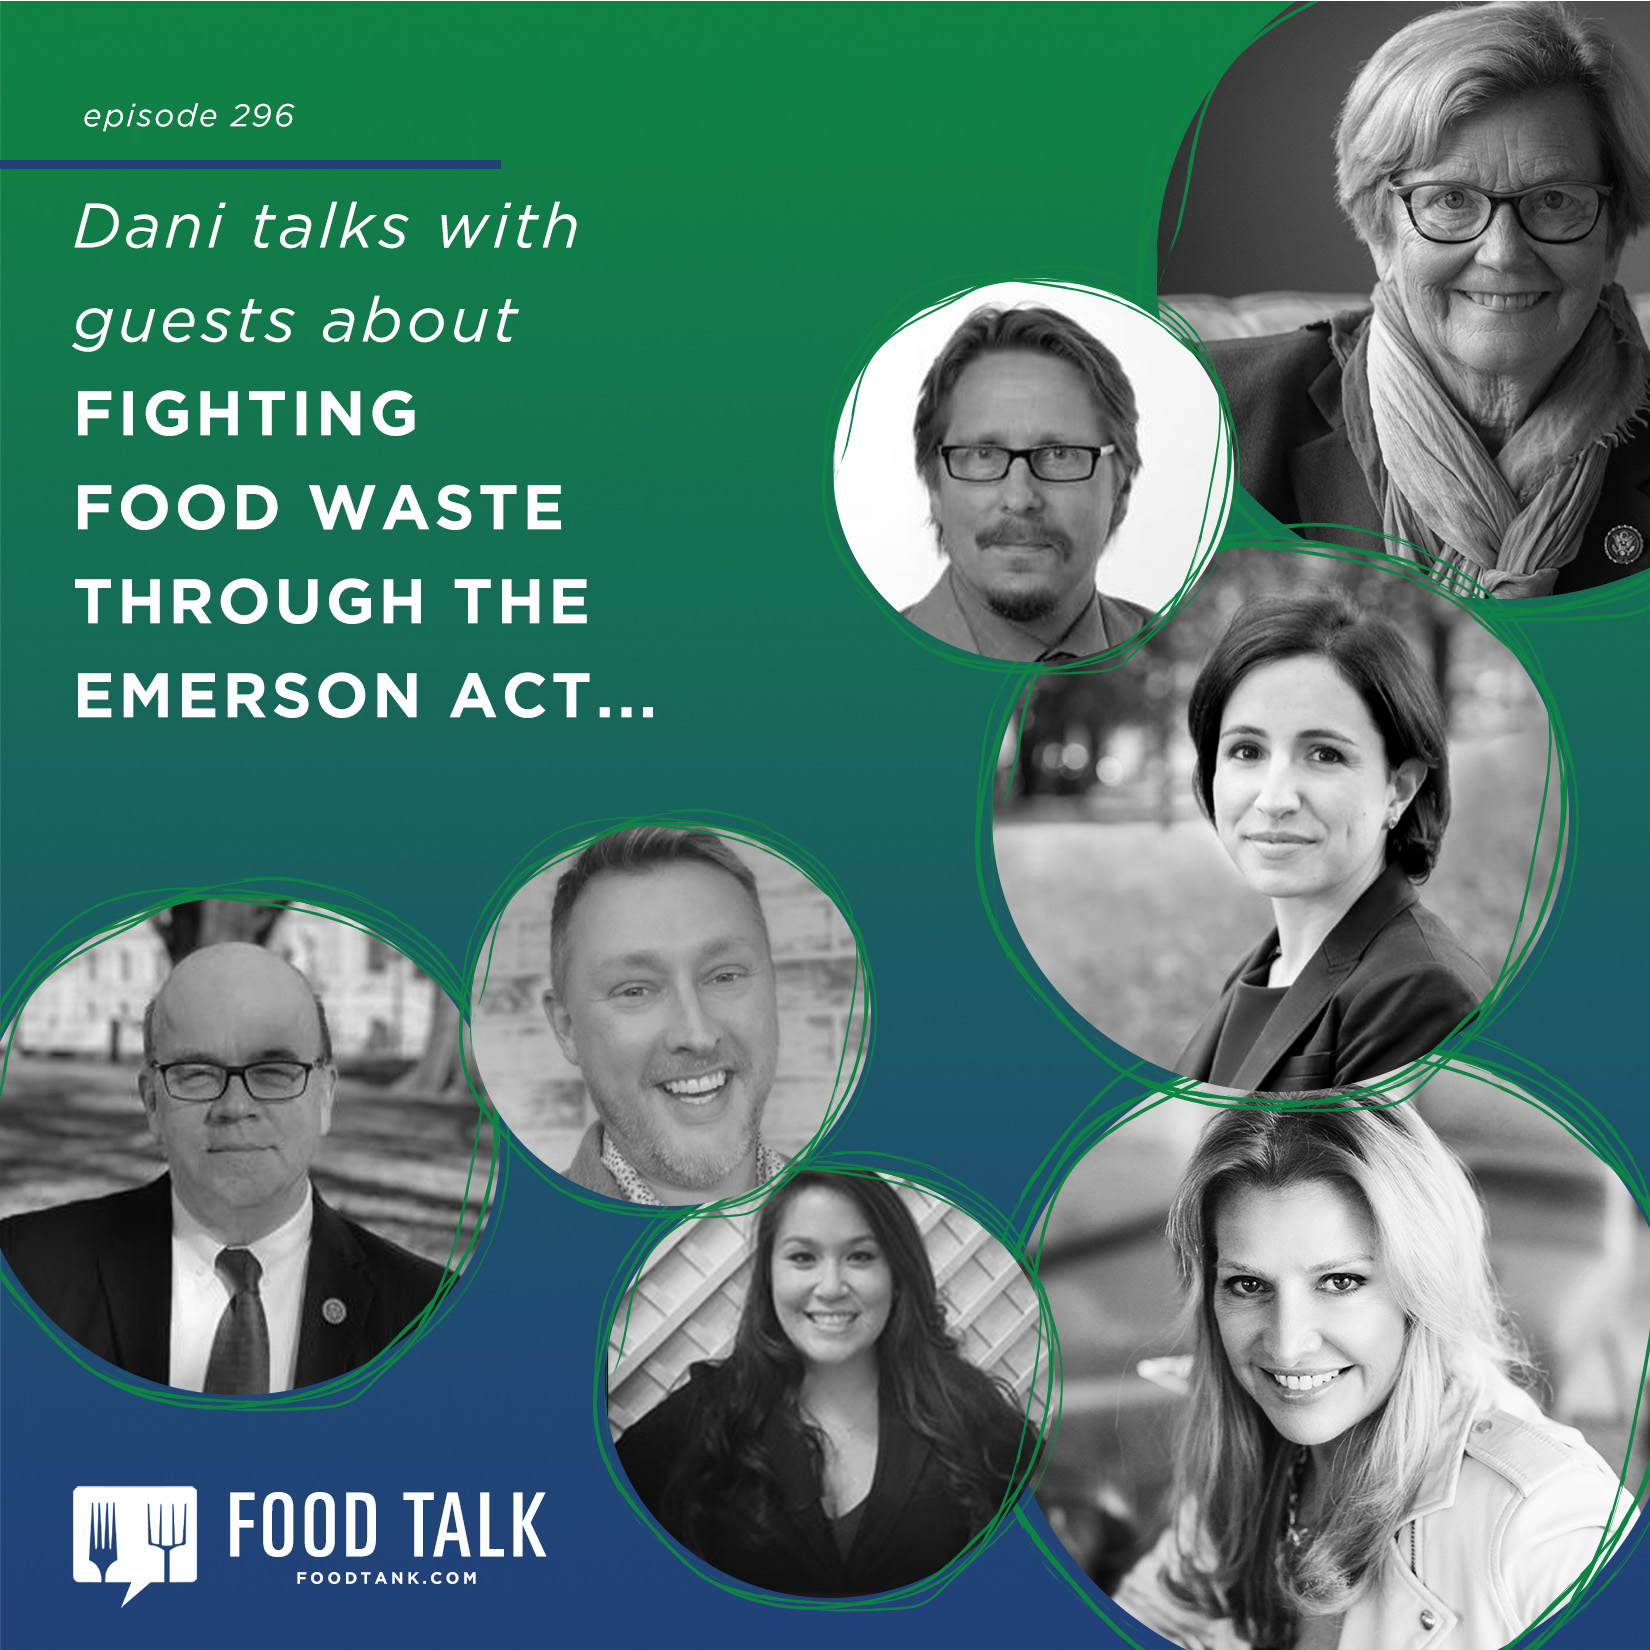 https://podcasts.apple.com/us/podcast/296-fighting-food-waste-through-the-emerson-act/id1434128568?i=1000545899516